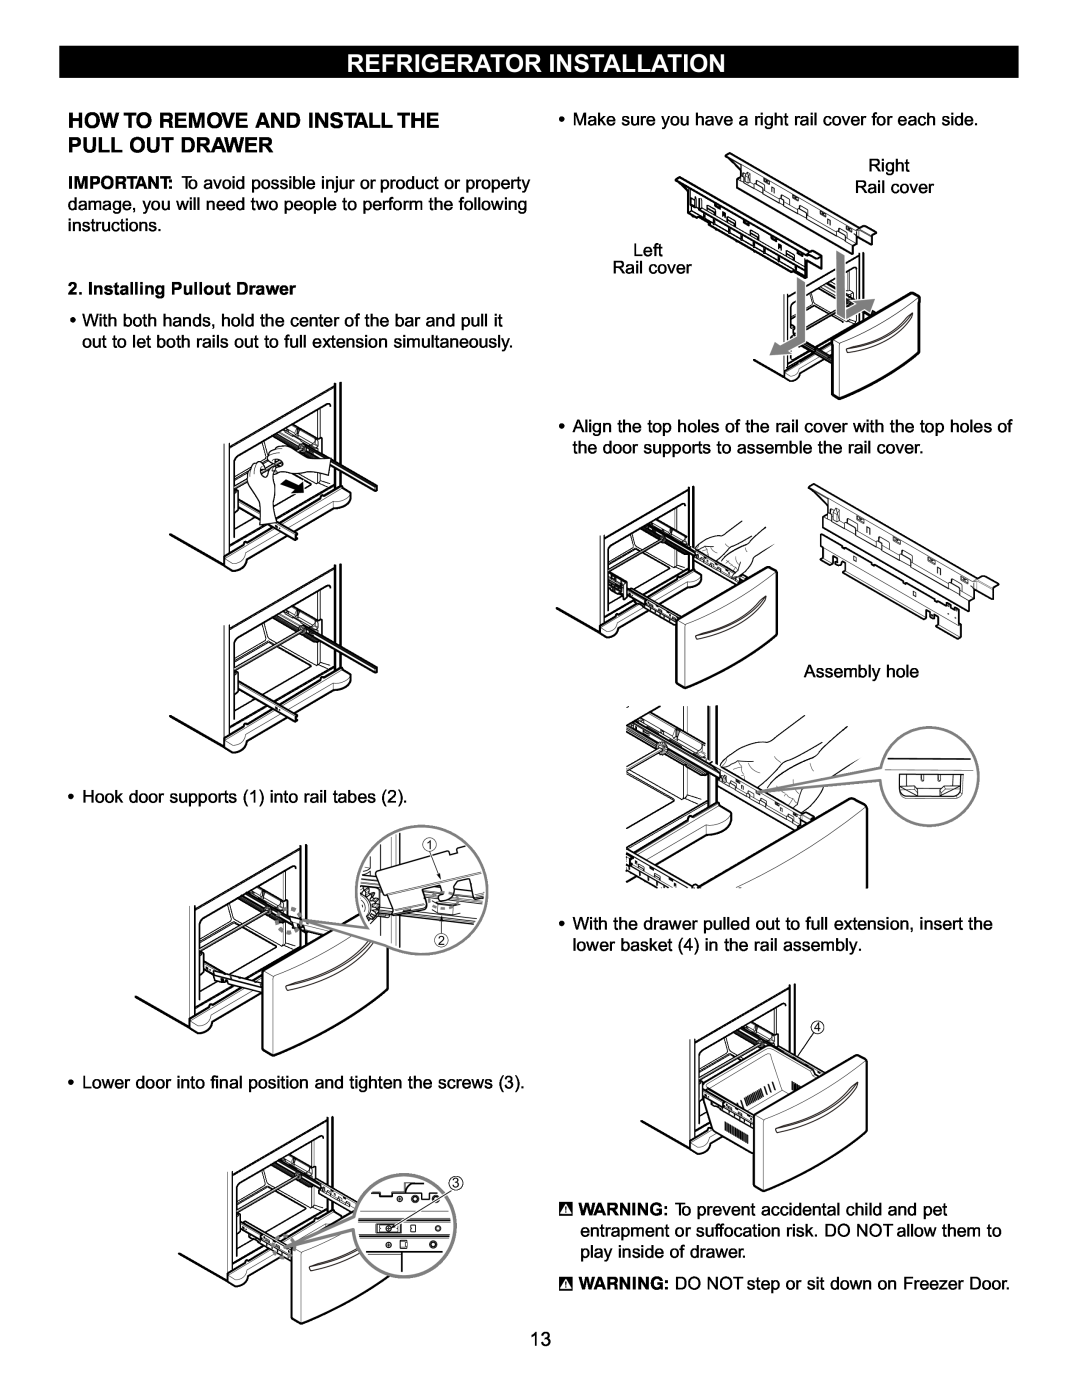 LG Electronics LFC23760 owner manual How To Remove And Install The Pull Out Drawer, Refrigerator Installation 